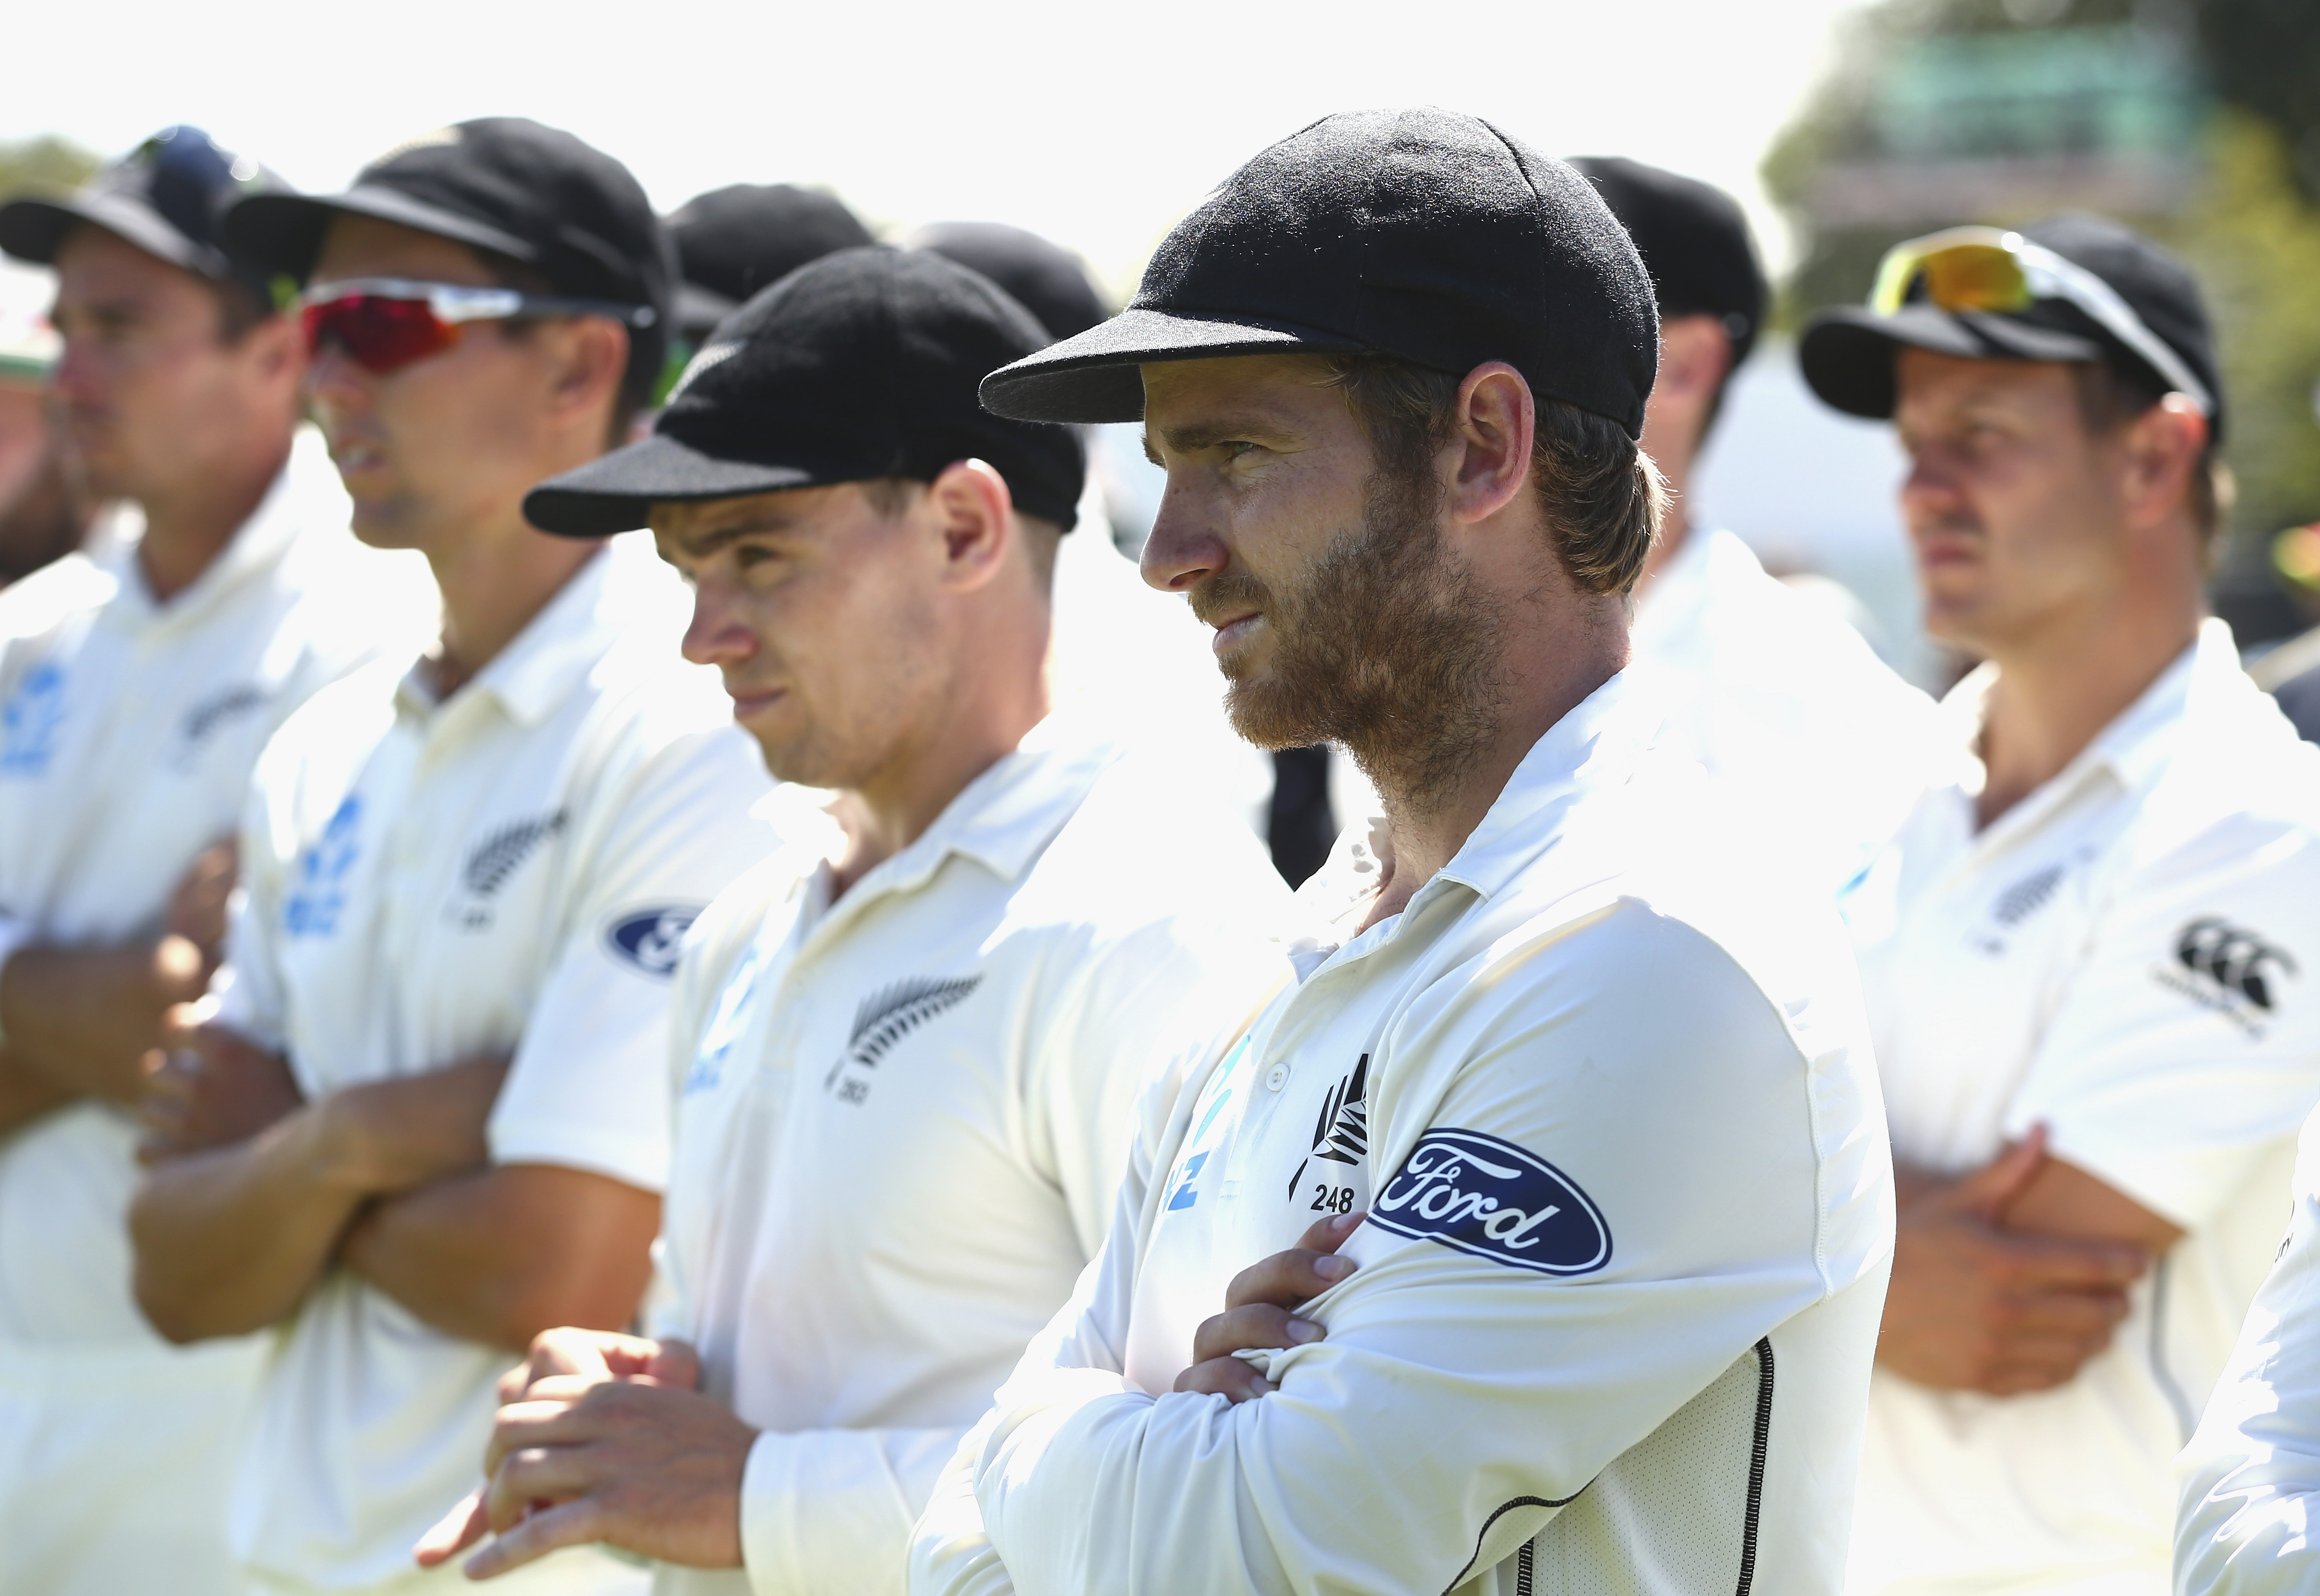 Can New Zealand do an England 2012 to India?